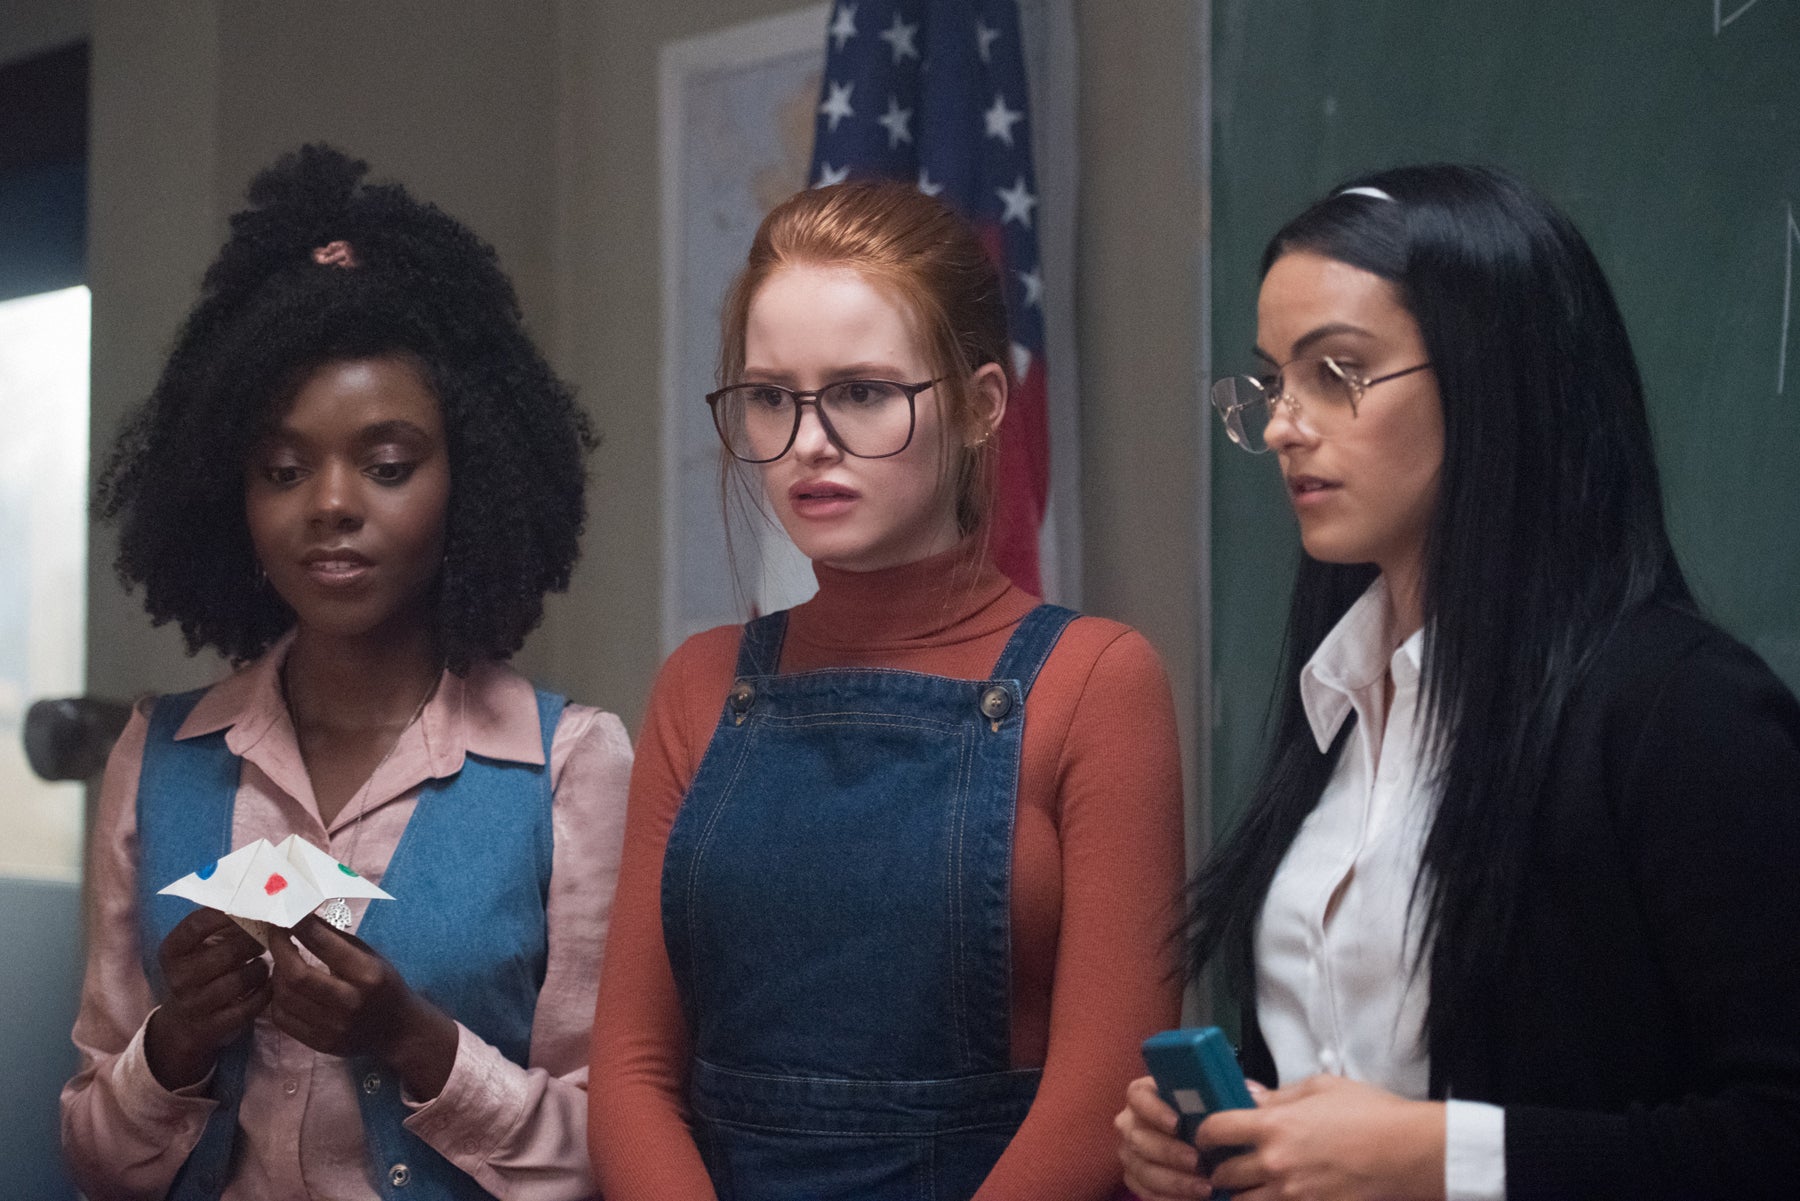 In a flashback scene, young versions of Sierra McCoy, Penelope Blossom, and Hermione Lodge stand in a line.